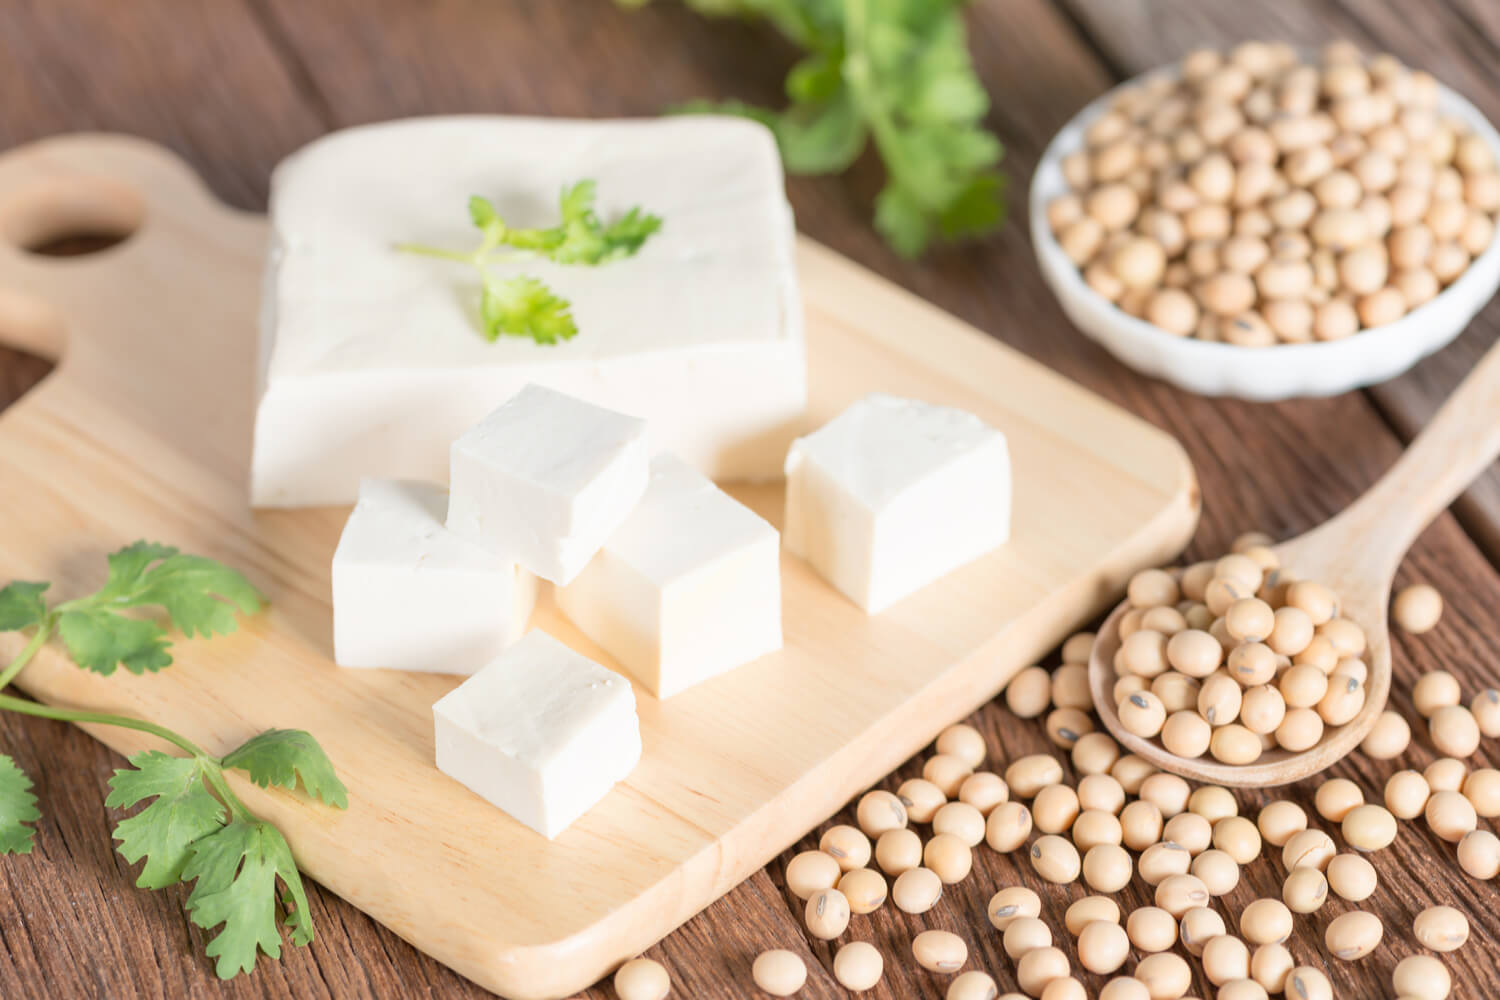 Tofu For Babies: When To Introduce And Health Benefits